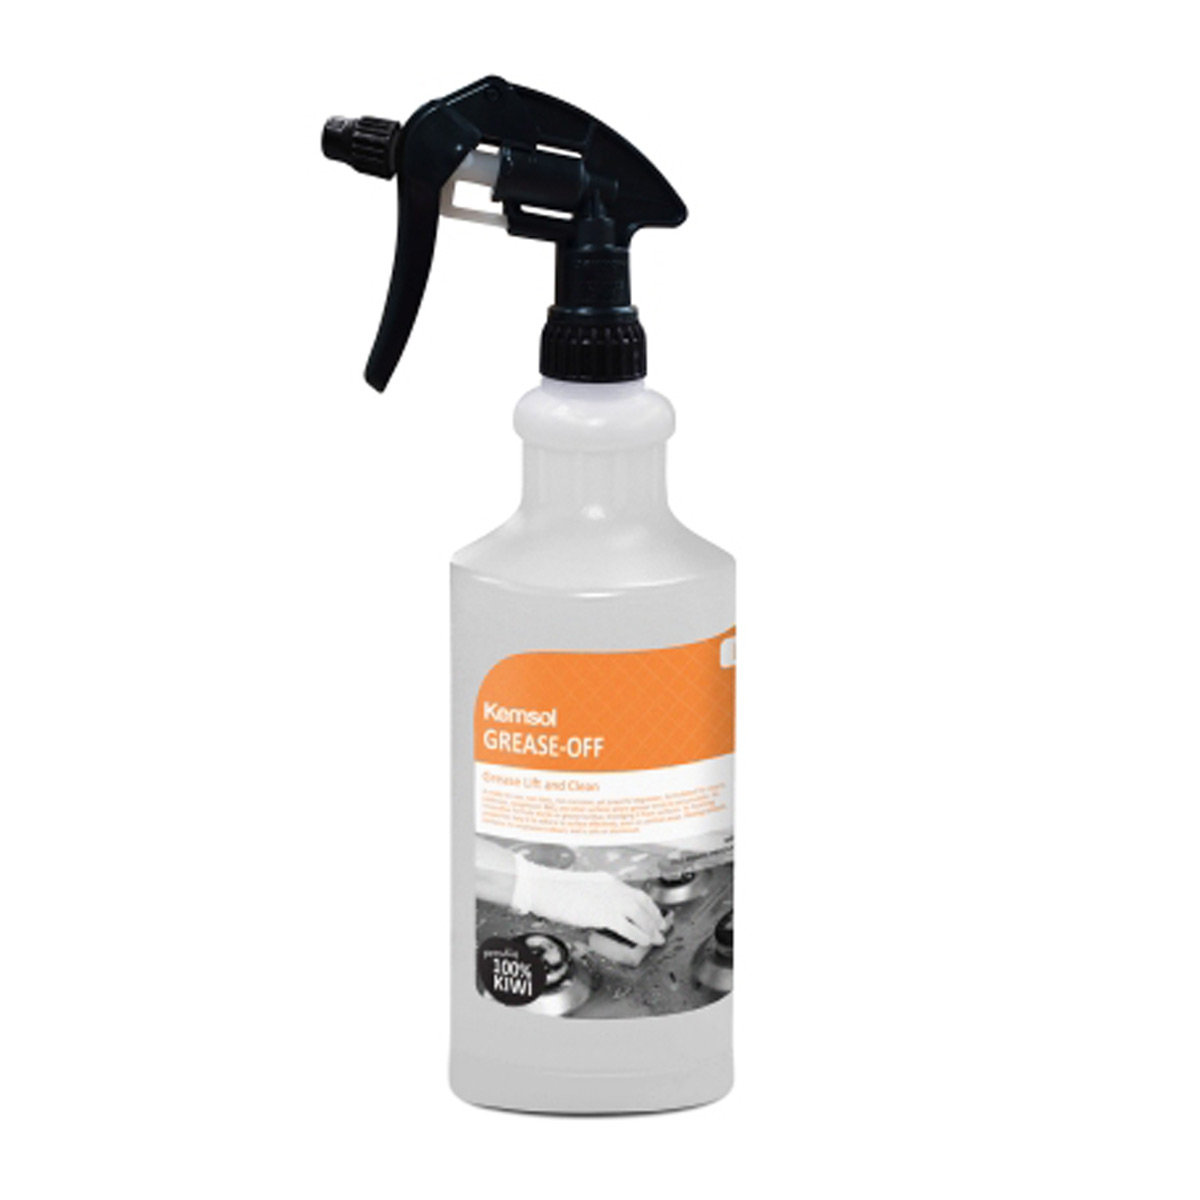 cleaning-equipment-bottles-triggers-pumps-grease-off-applicator-kit-750ml-ready-to-use-non-toxic-non-corrosive-ovens-cooktops-rangehoods-BBQ-vjs-distributors-hawkes-bay-nz-KGREASEAPP